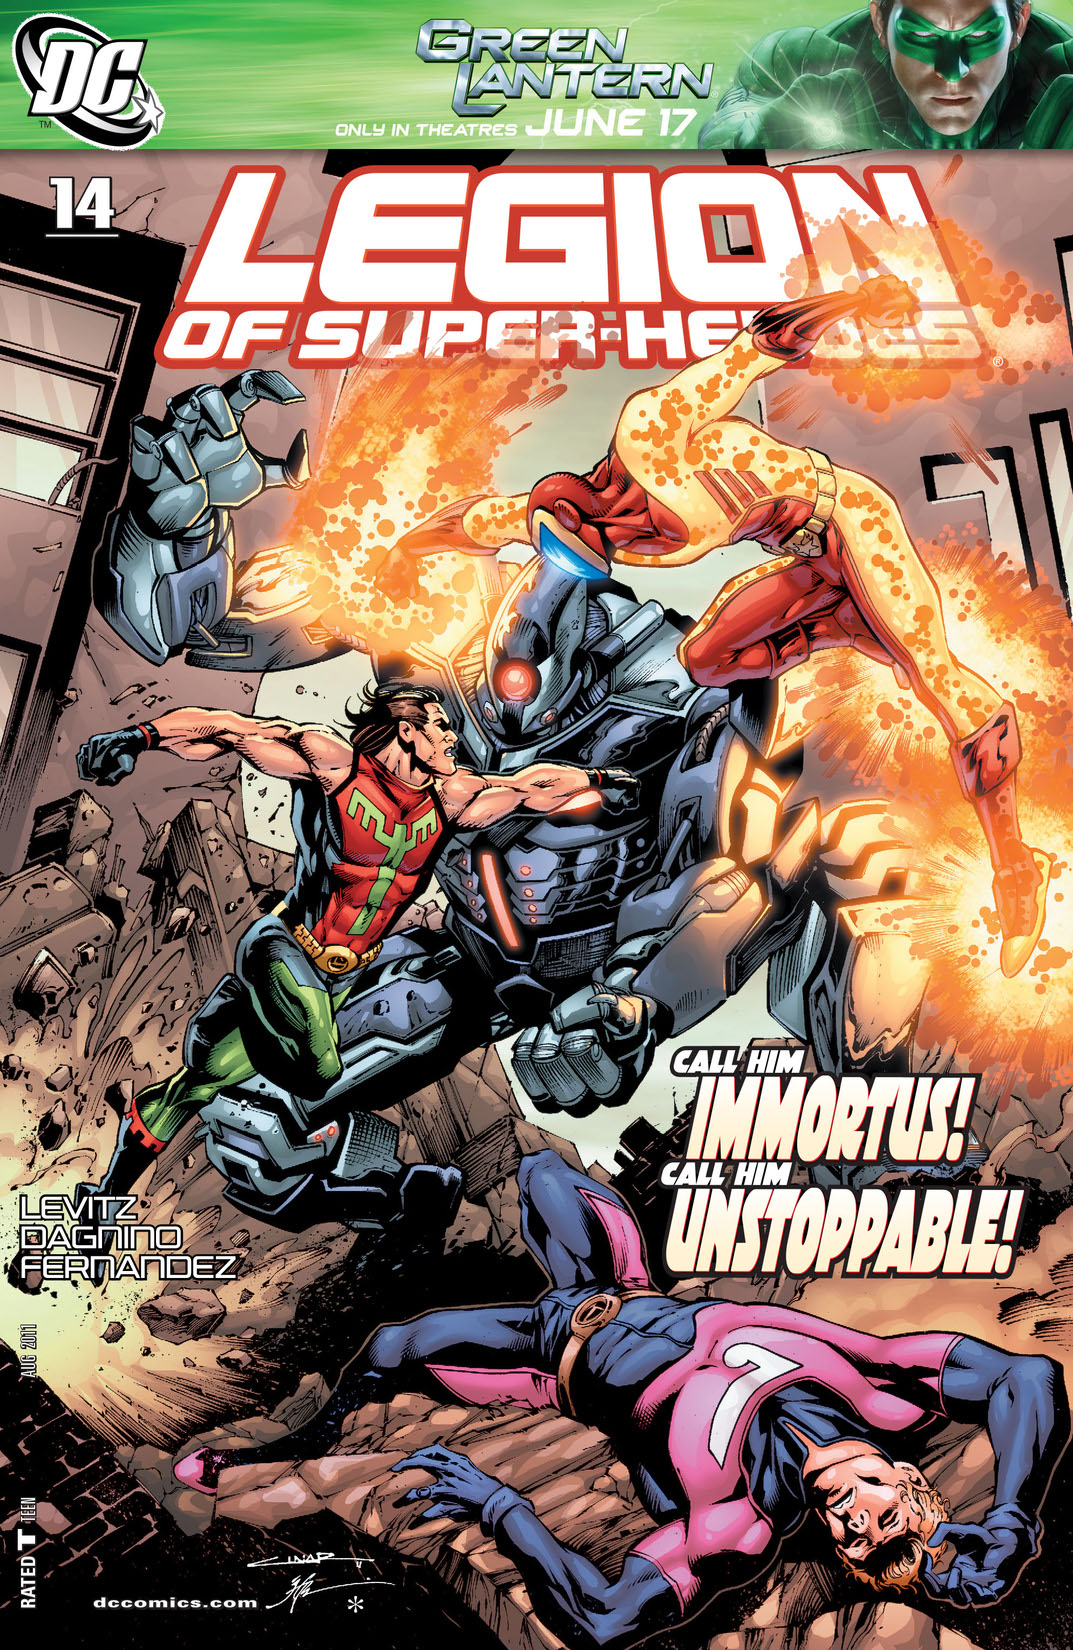 Legion of Super-Heroes (2010-) #14 preview images